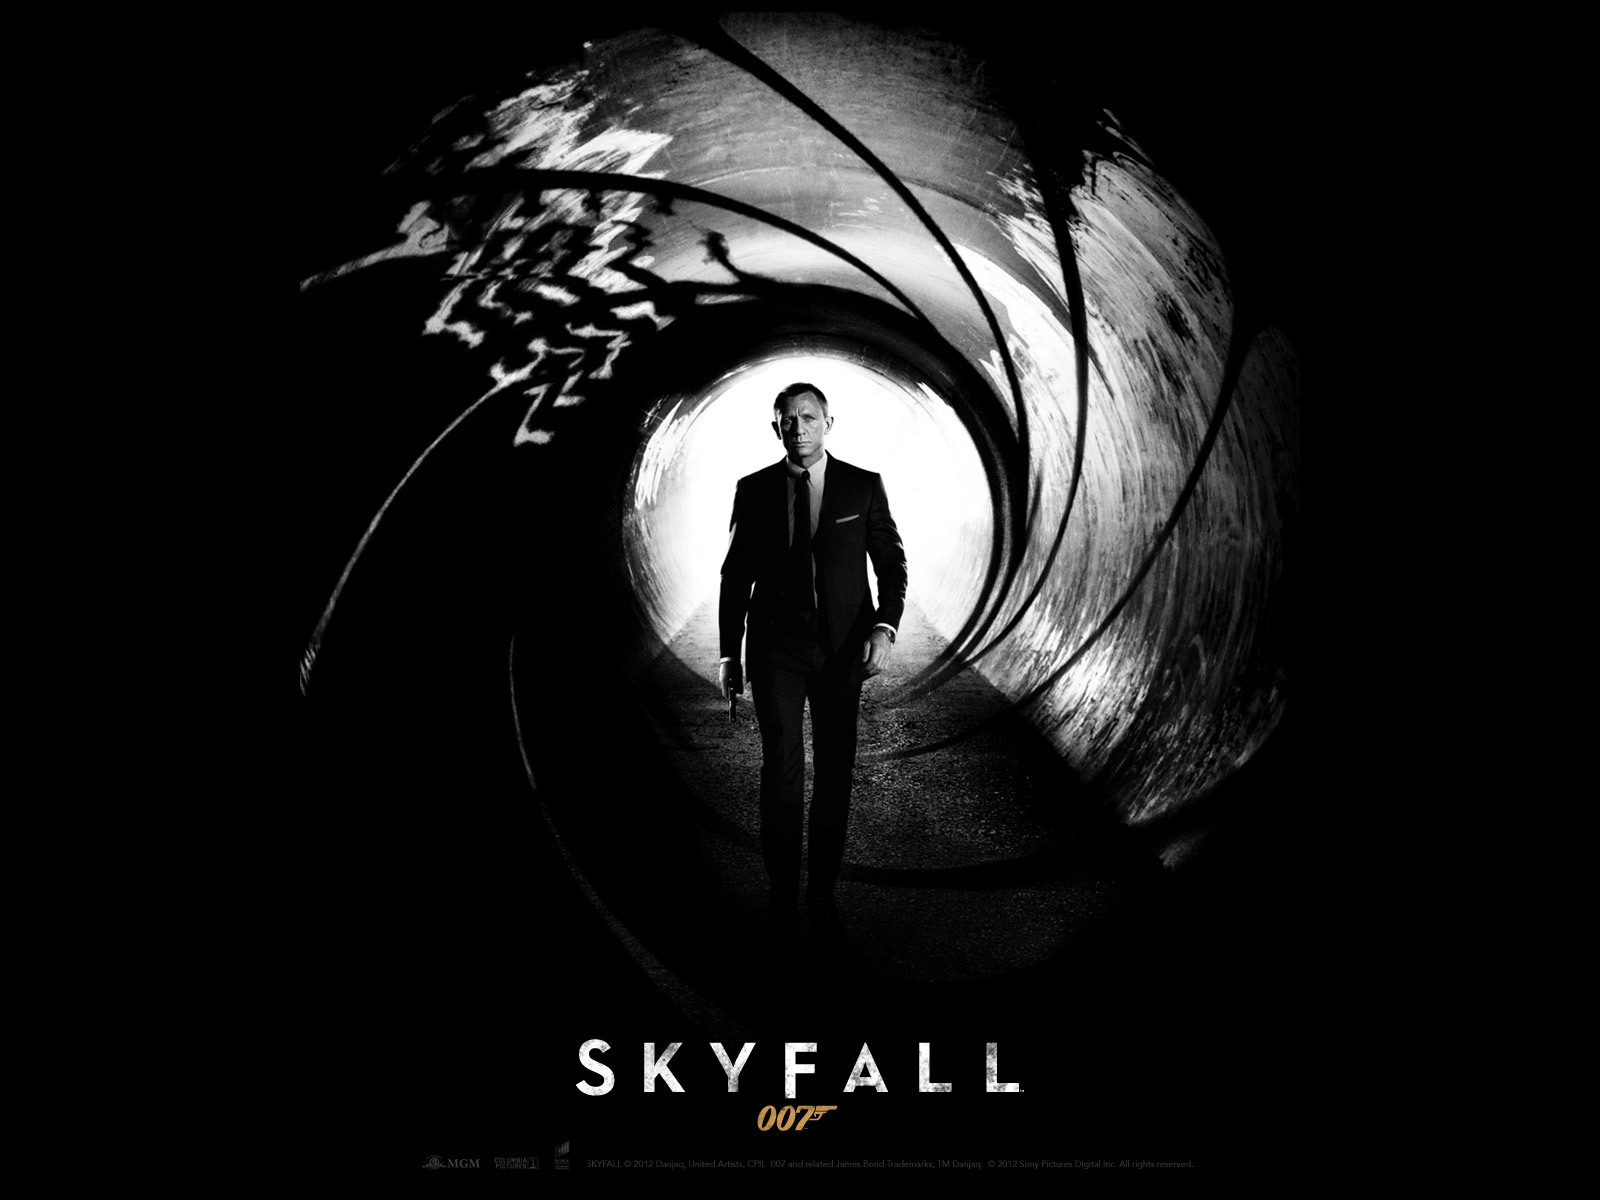 Download High quality Skyfall 007 wallpaper / Movies / 1600x1200